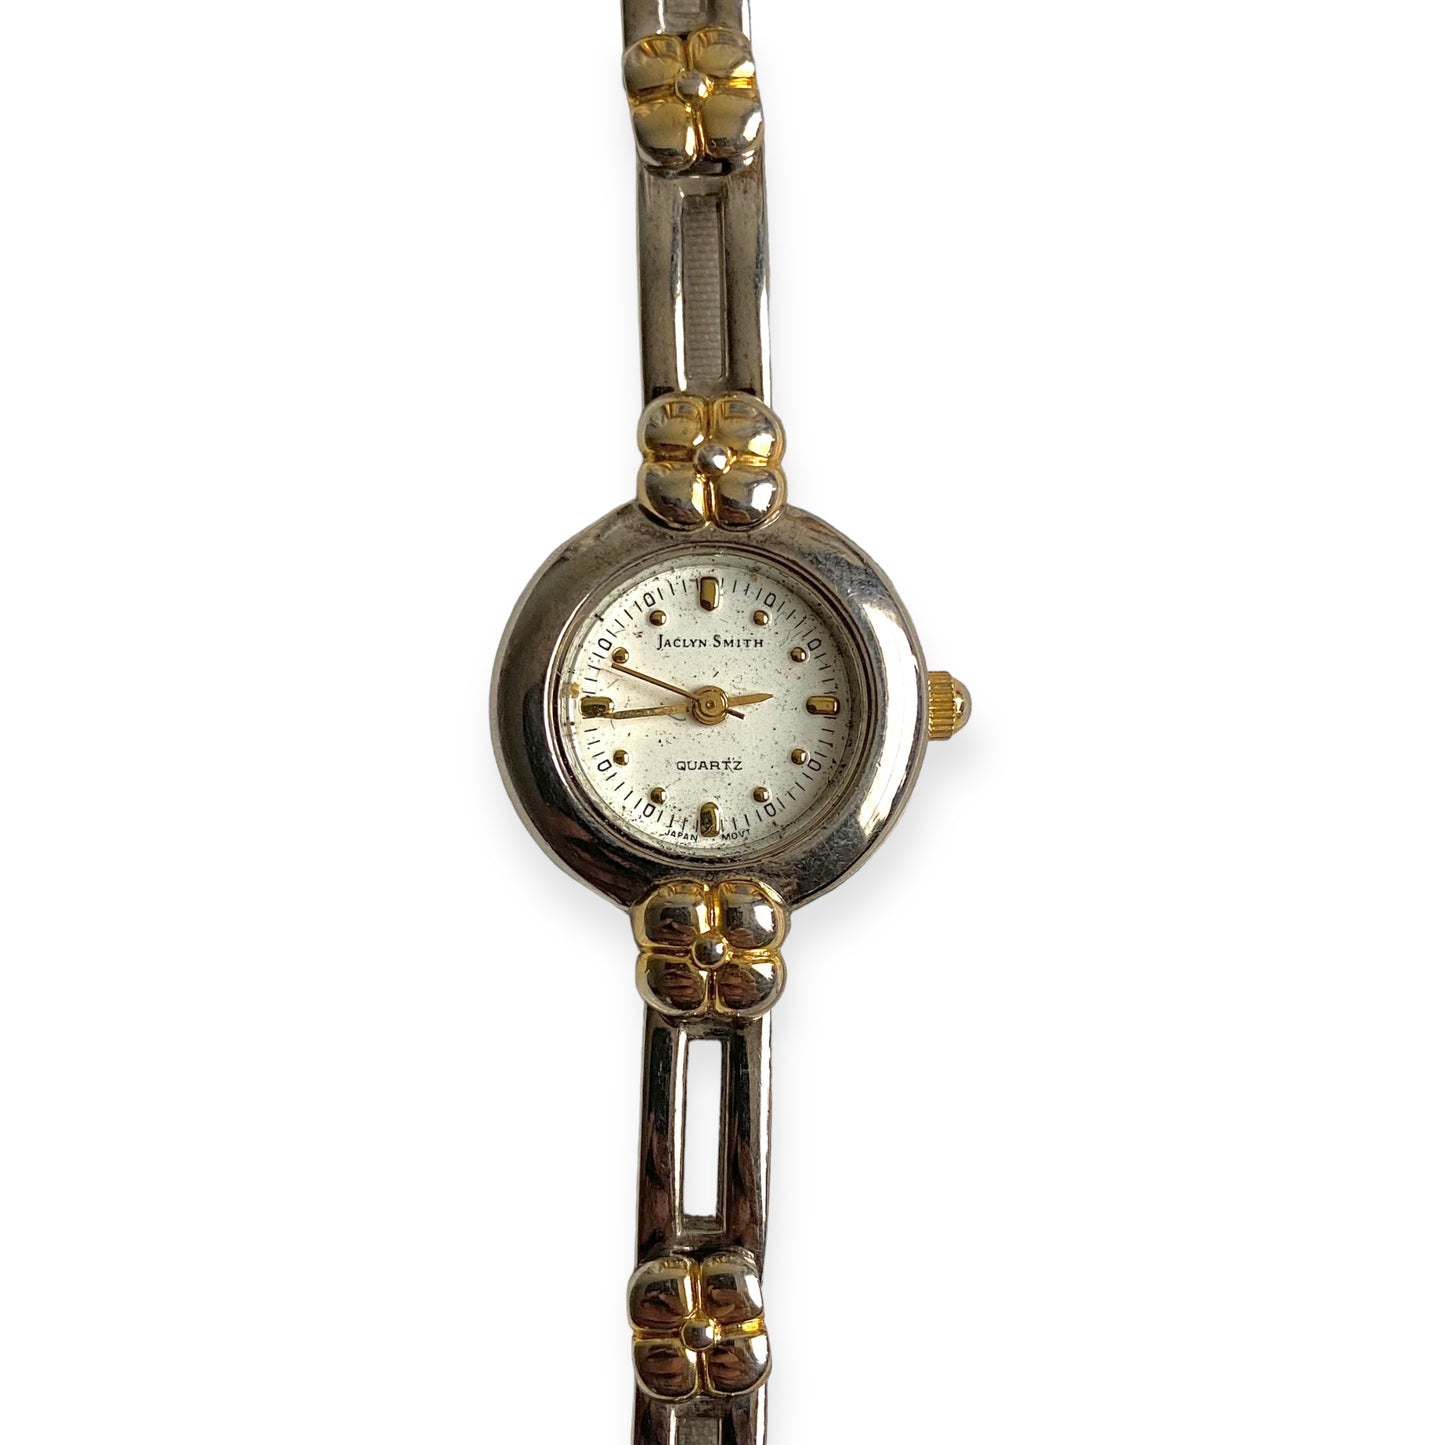 One-of-one | Jaclyn smith quartz Japan movt. Gold & silver flower watch